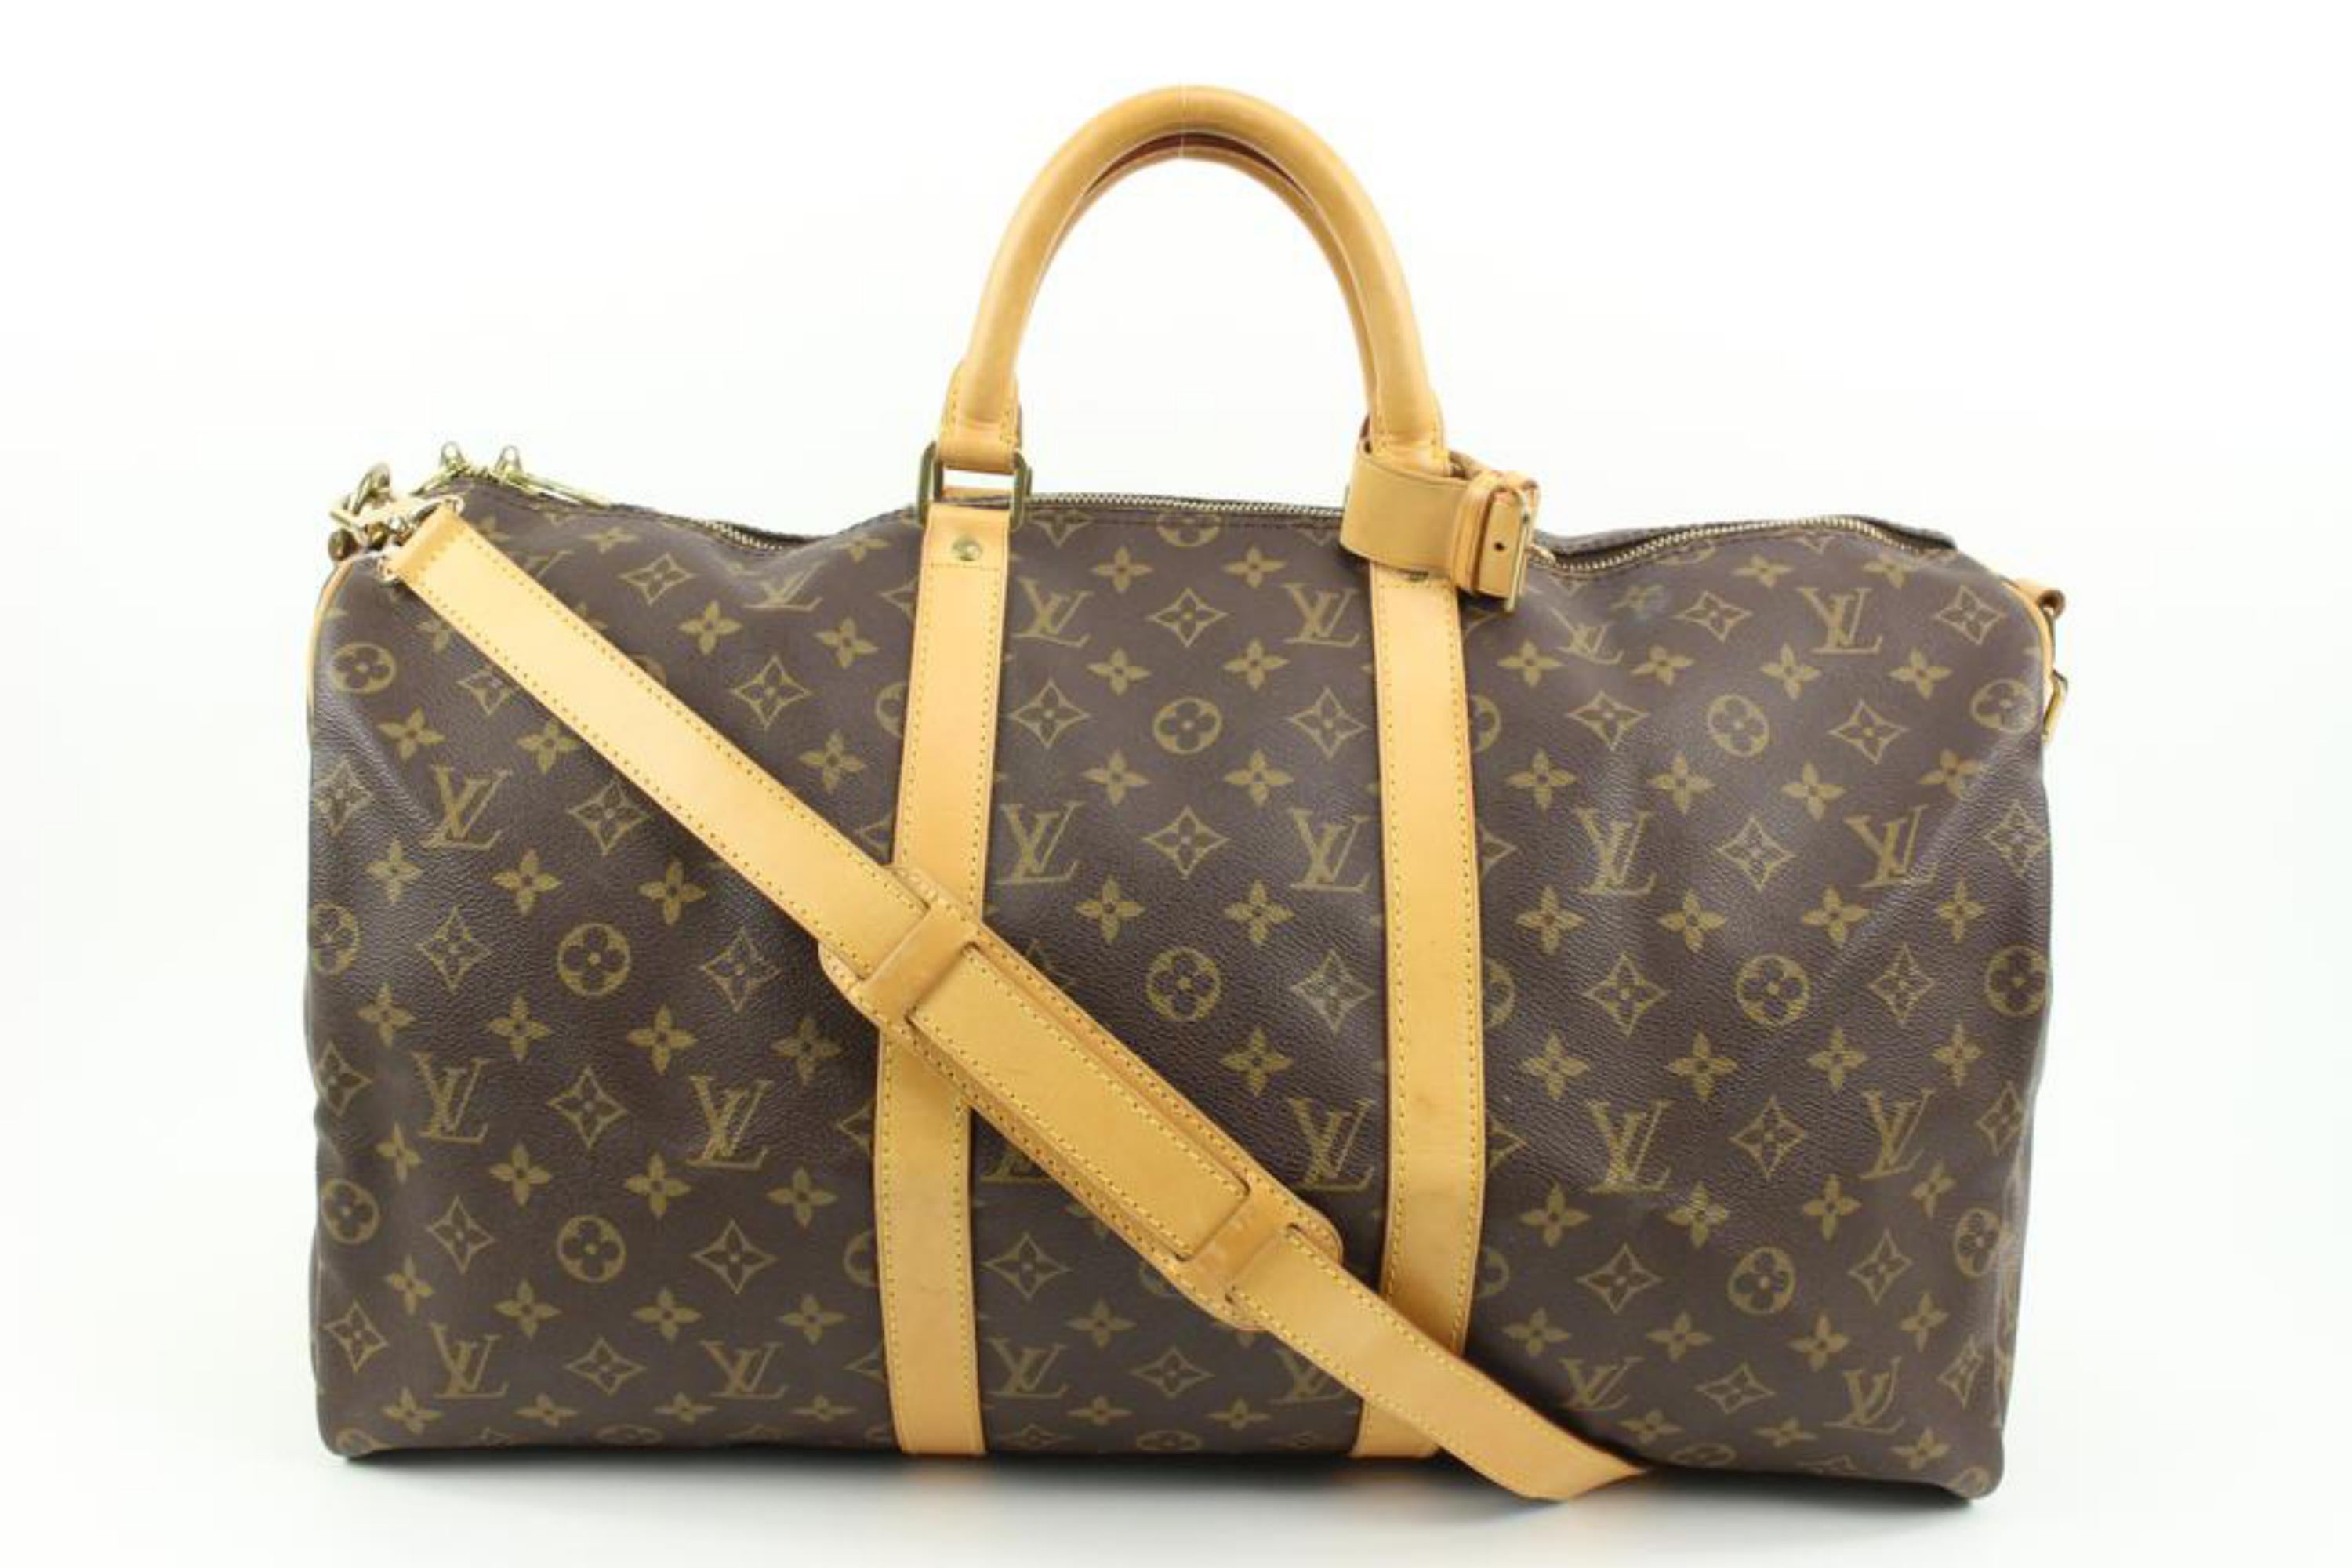 Louis Vuitton Monogram Keepall Bandouliere 45 Duffle Bag with Strap 1221lv15
Date Code/Serial Number: TH0918
Made In: France
Measurements: Length:  18